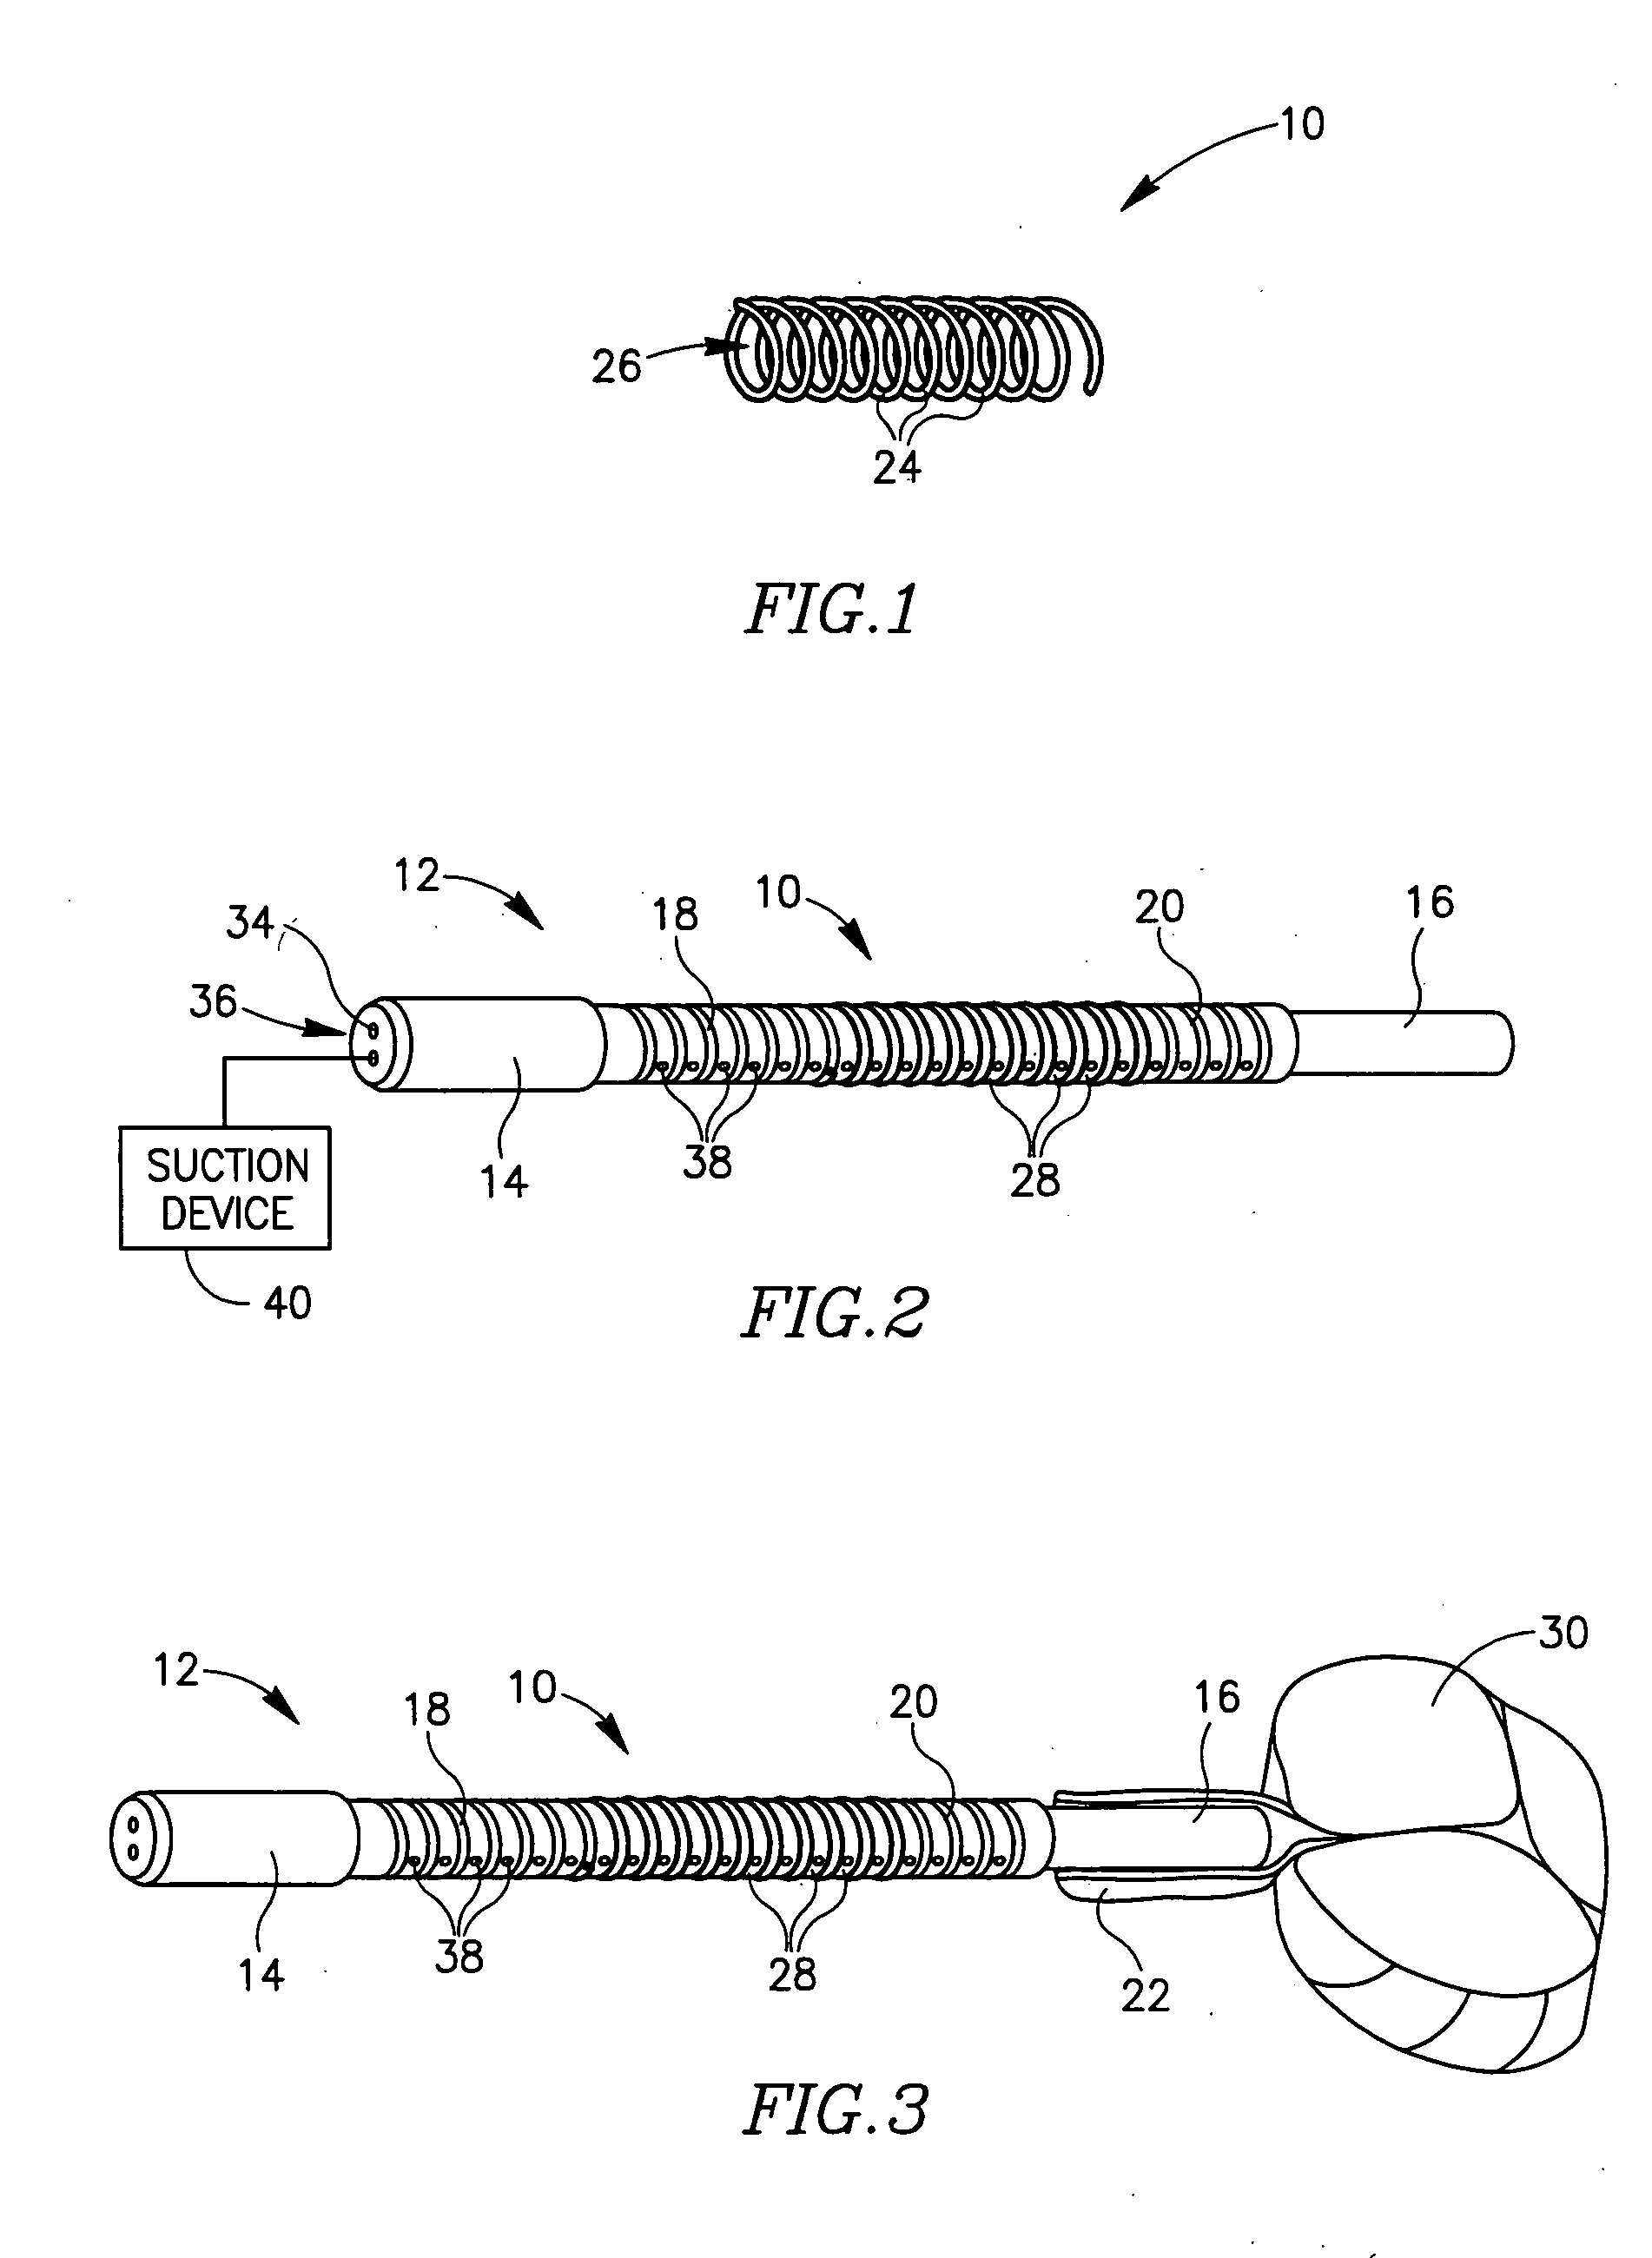 Implant and delivery tool therefor